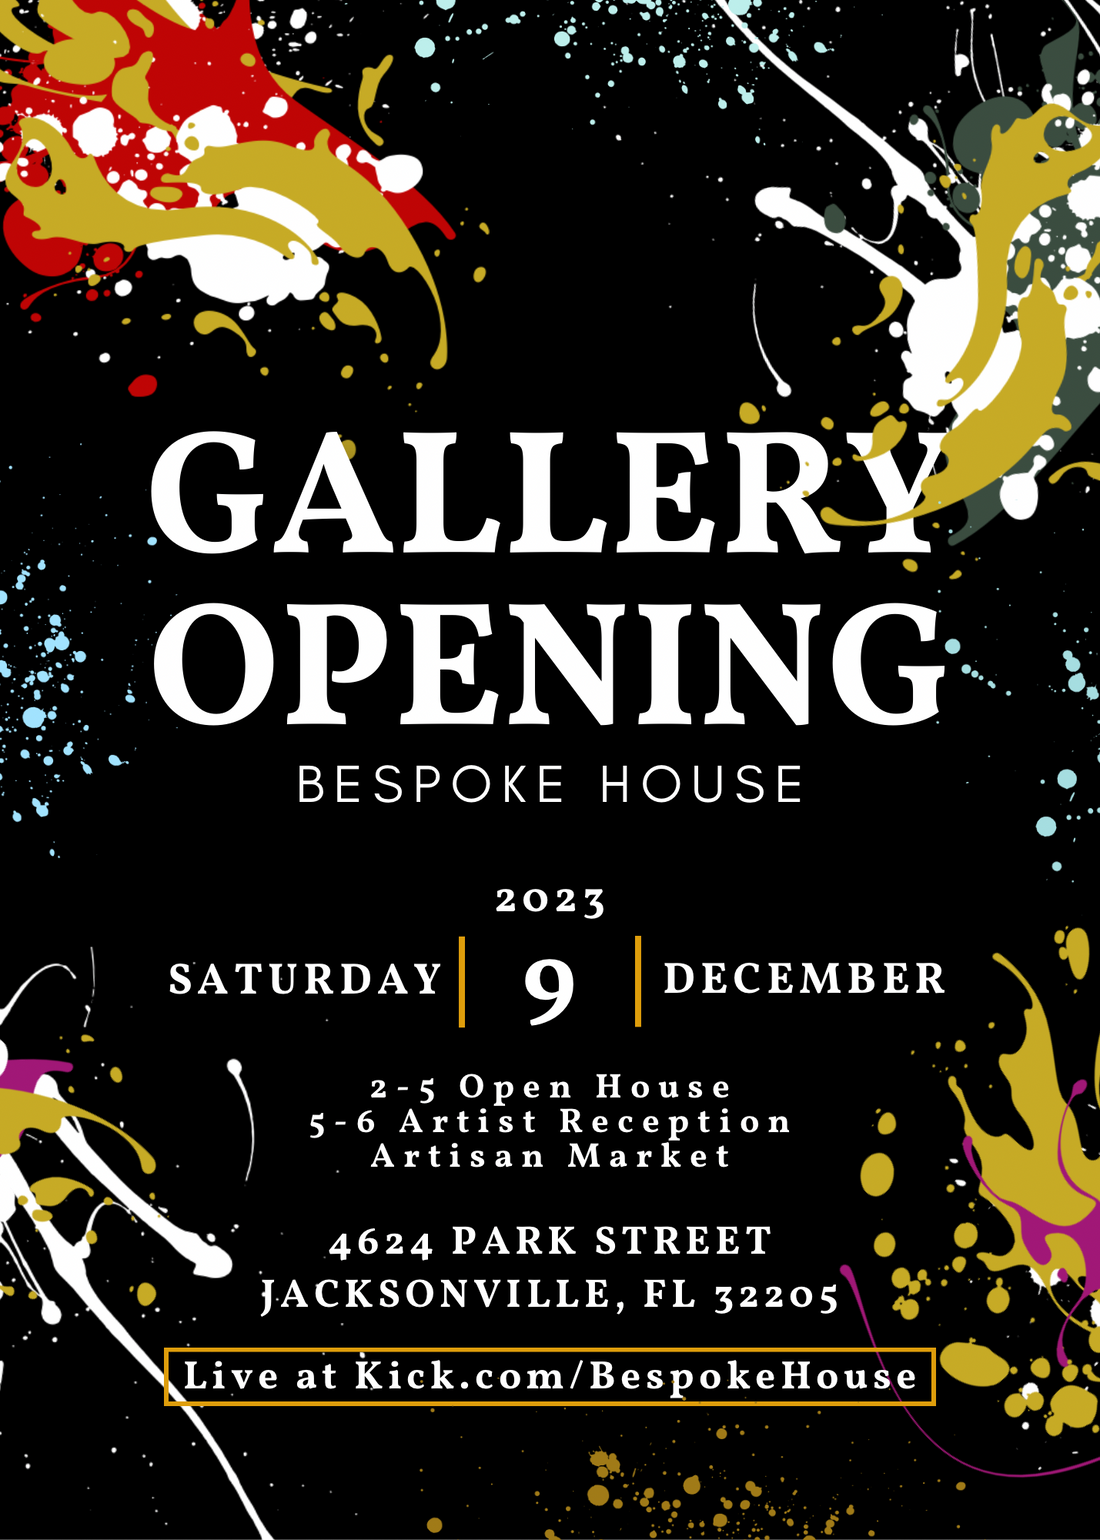 Bespoke House Gallery Opening: A Haven for Art Lovers and First Coast Creatives